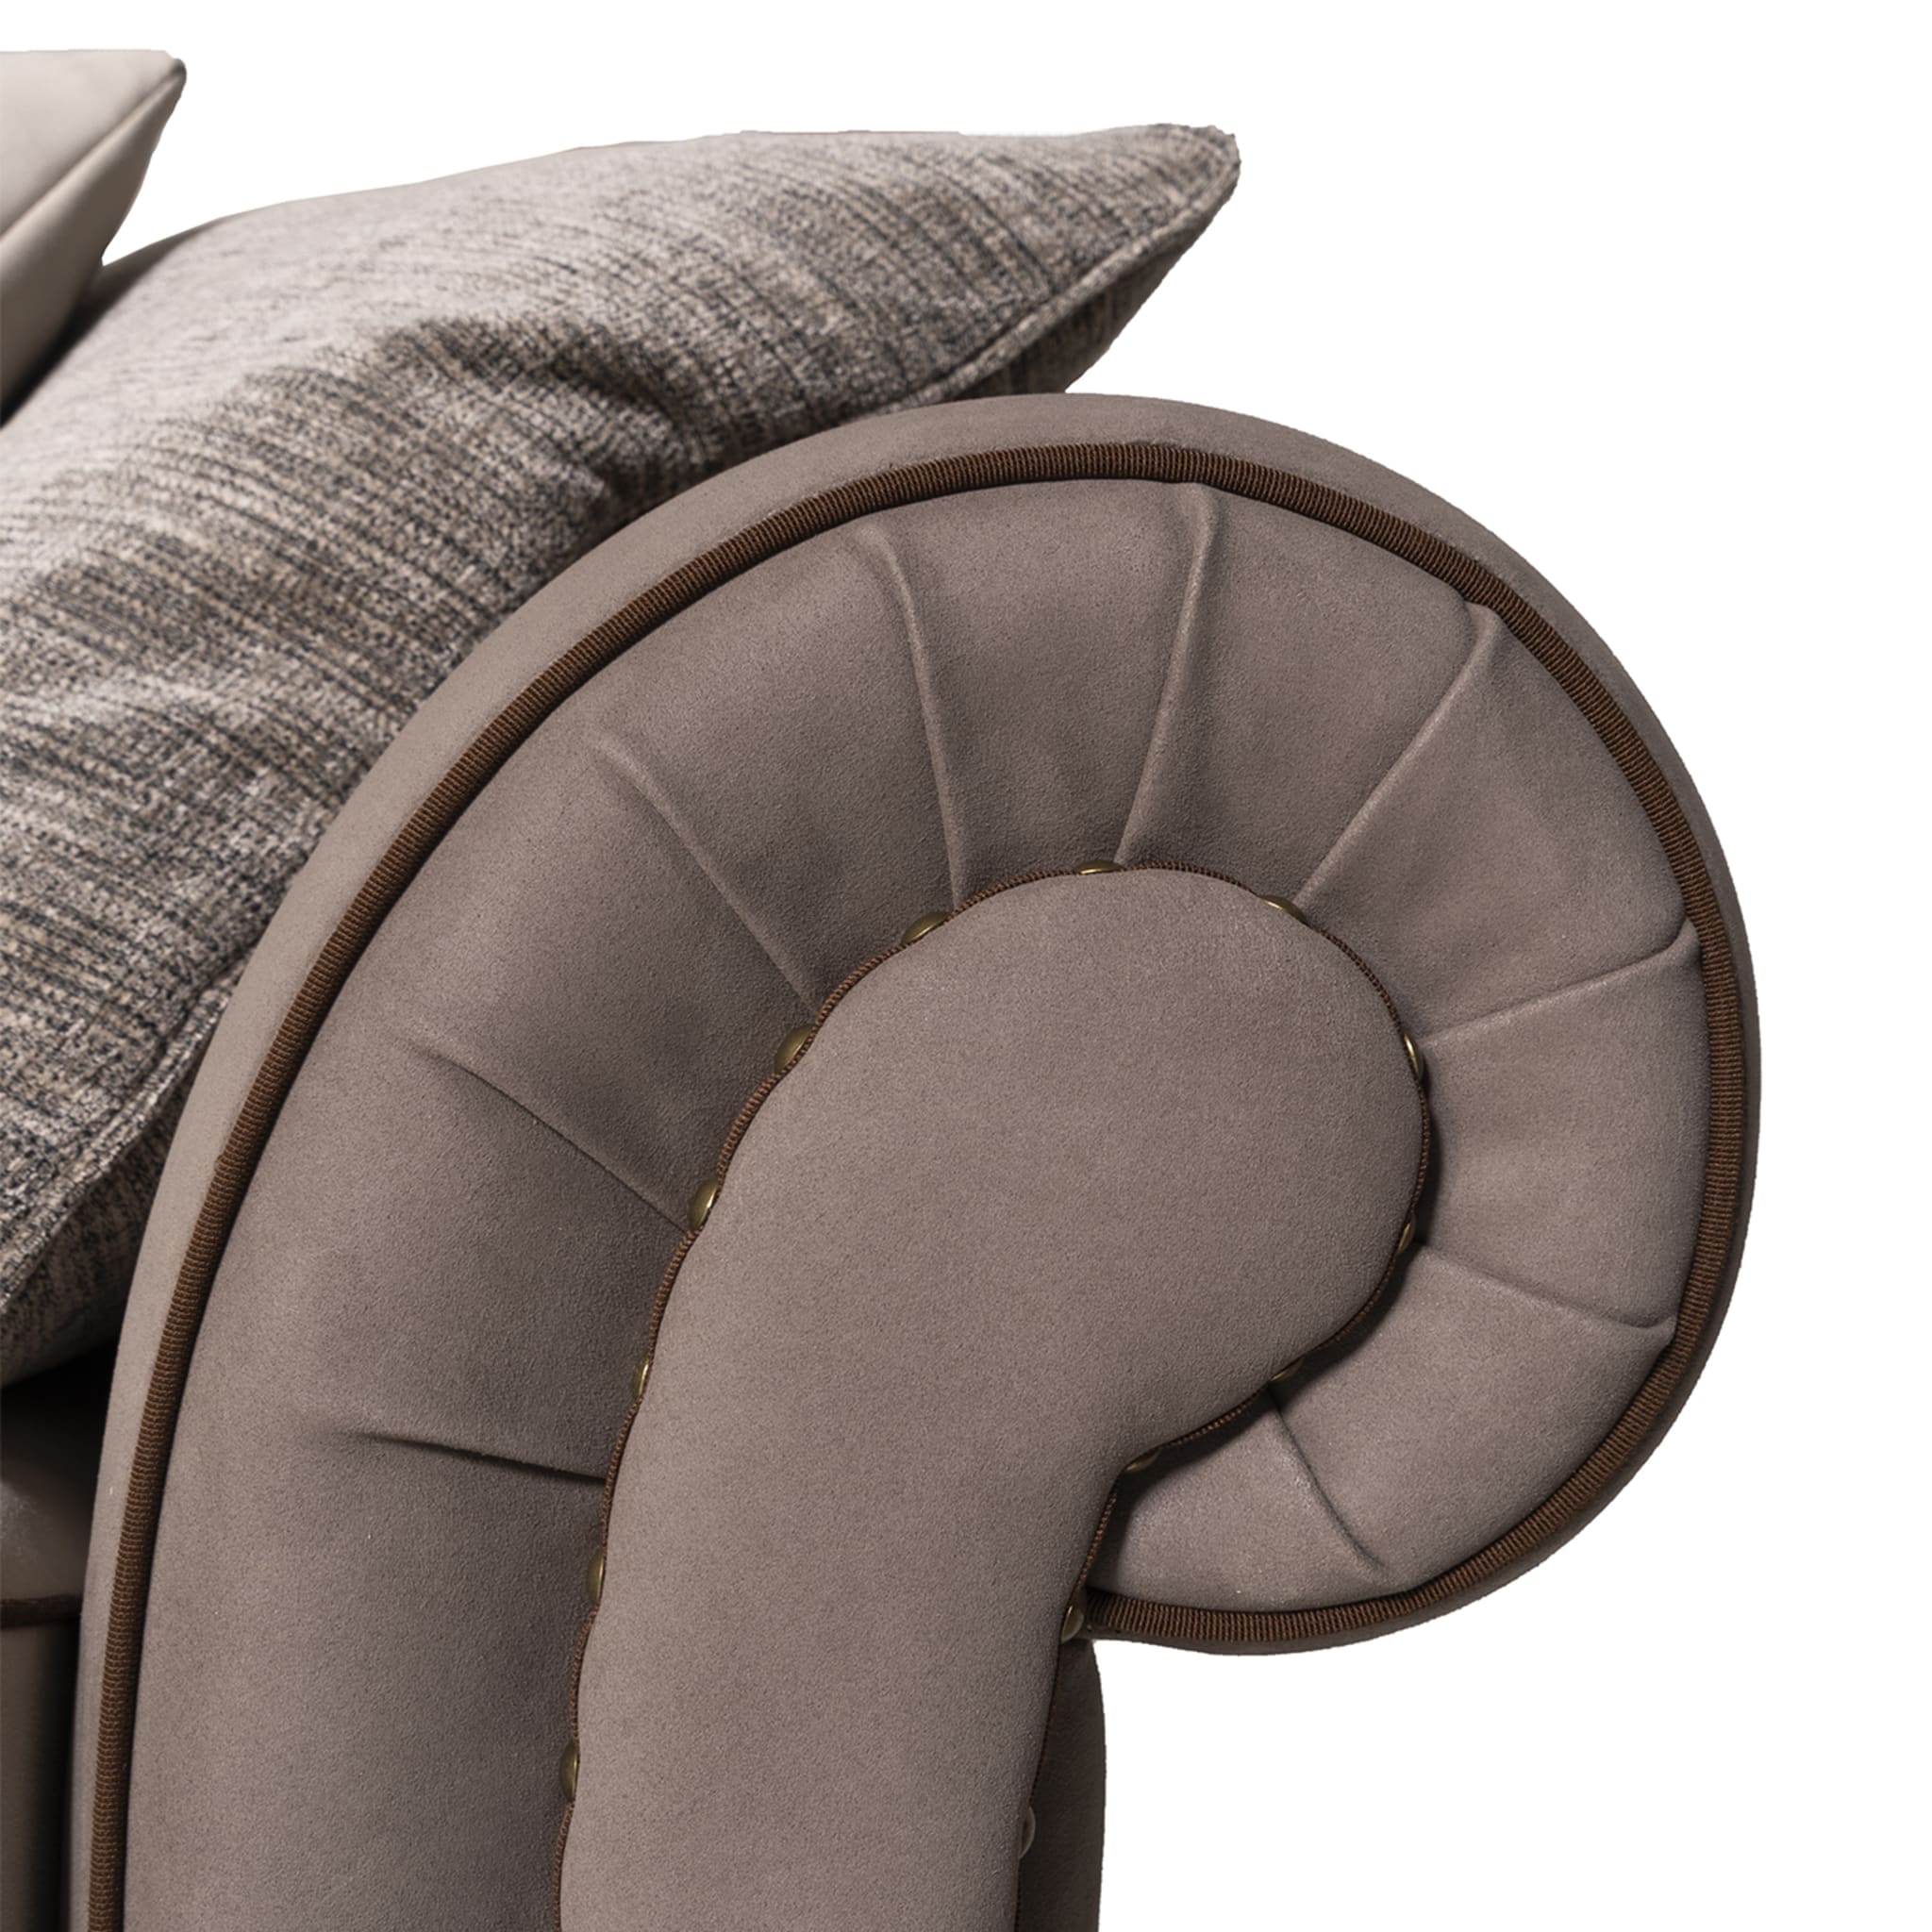 Borghese 3-Seater Sofa by Marco and Giulio Mantellassi - Alternative view 3